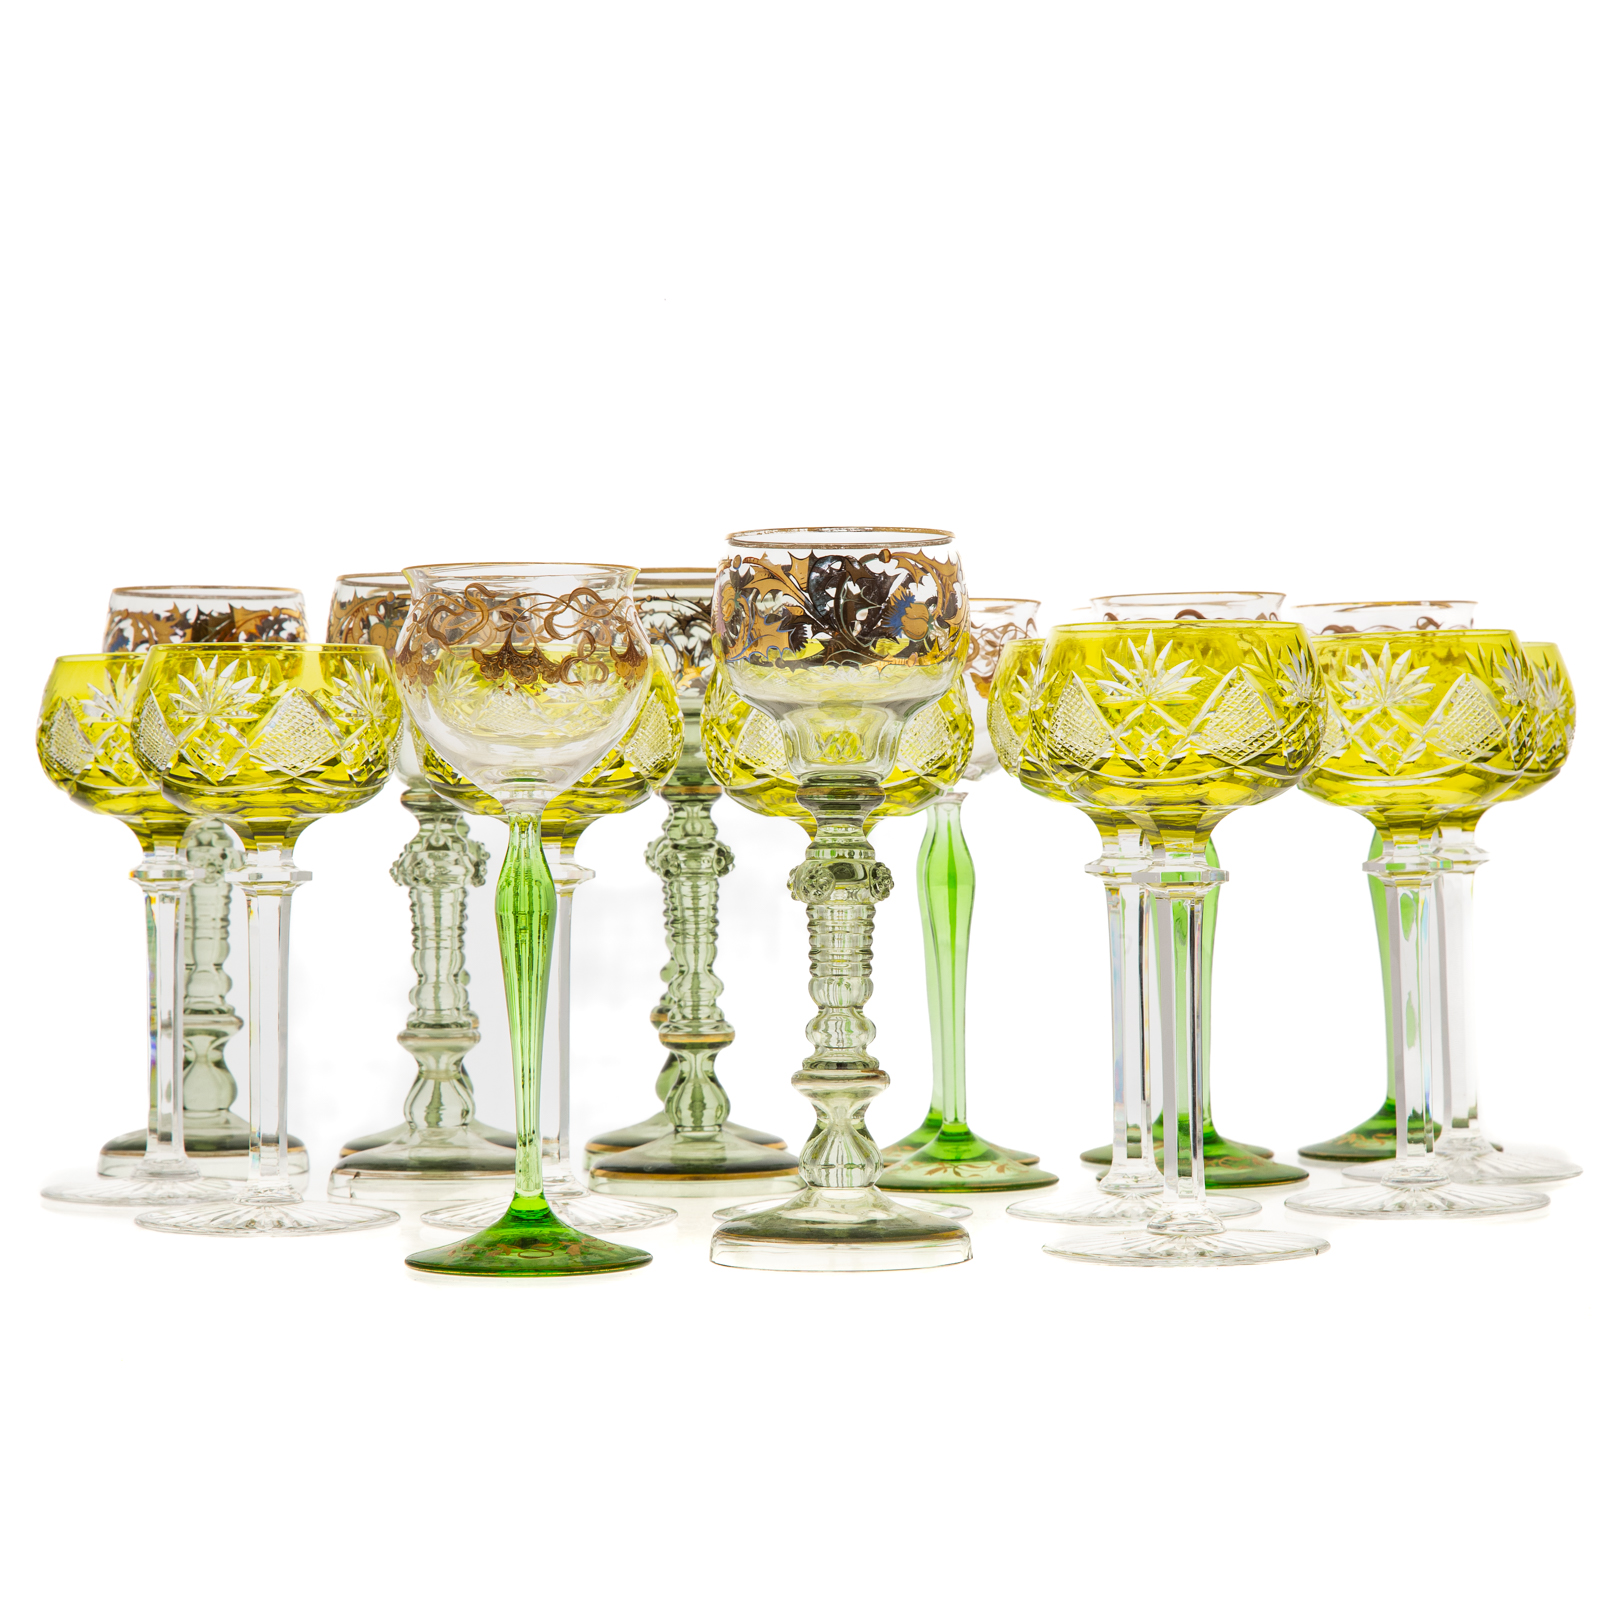 20 ASSORTED WINE STEMS Includes: